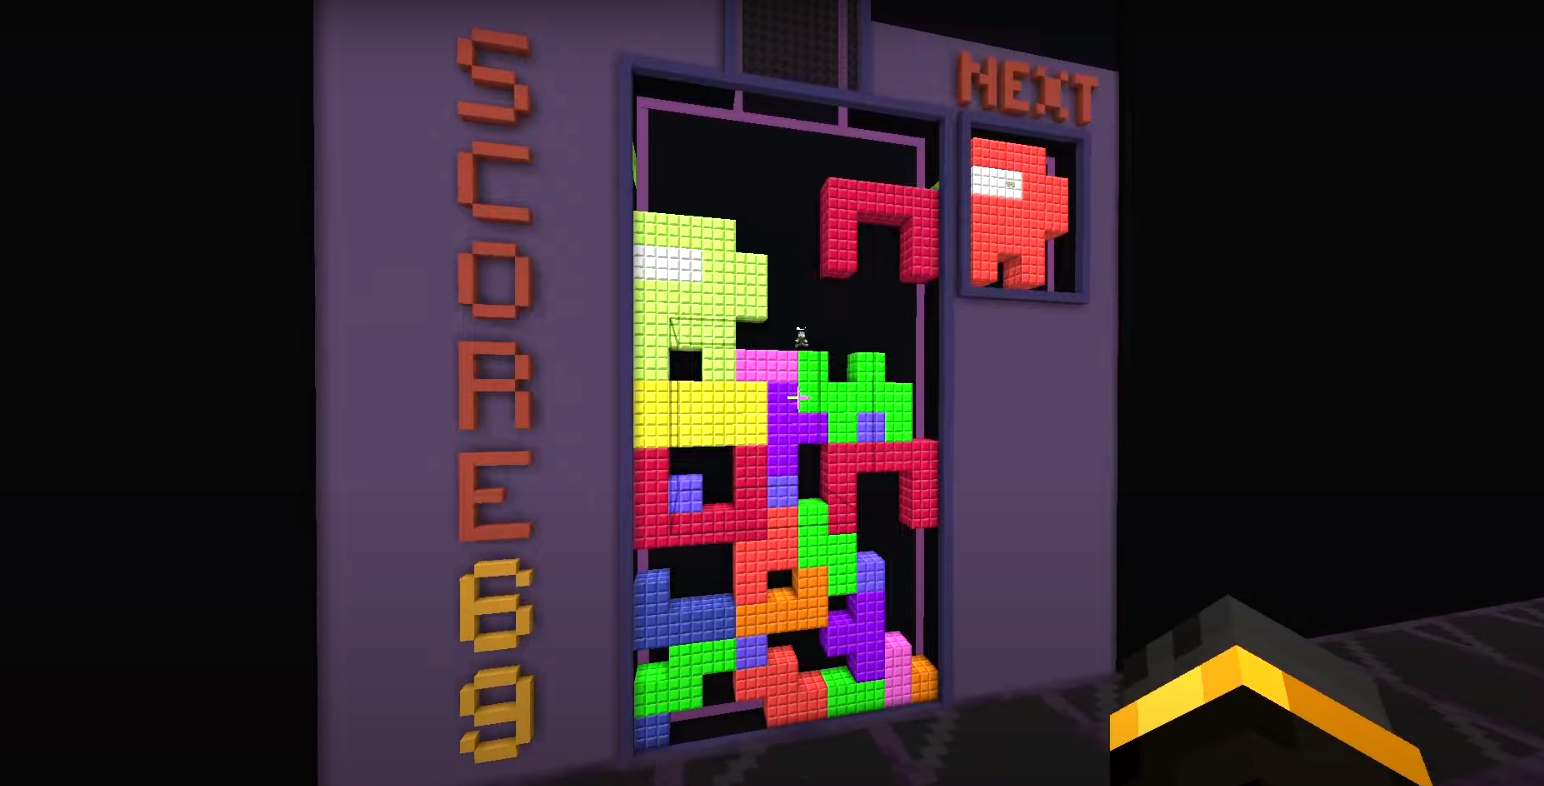 This Minecraft player built a working Tetris minigame